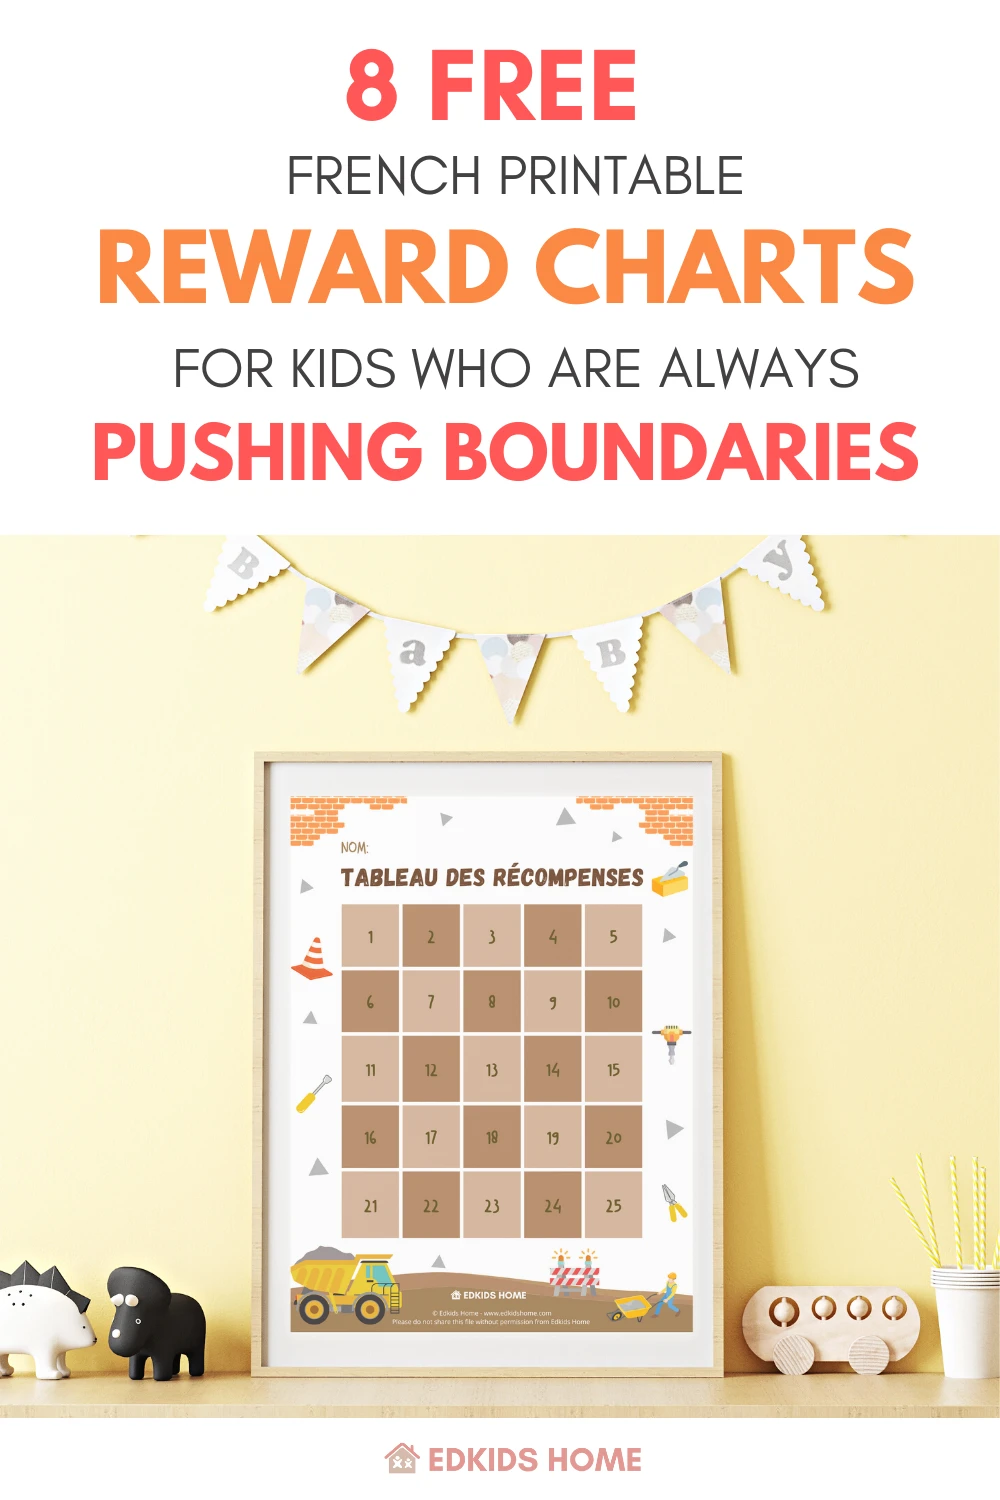 8 free French printable reward chart for kids who are always pushing boundaries